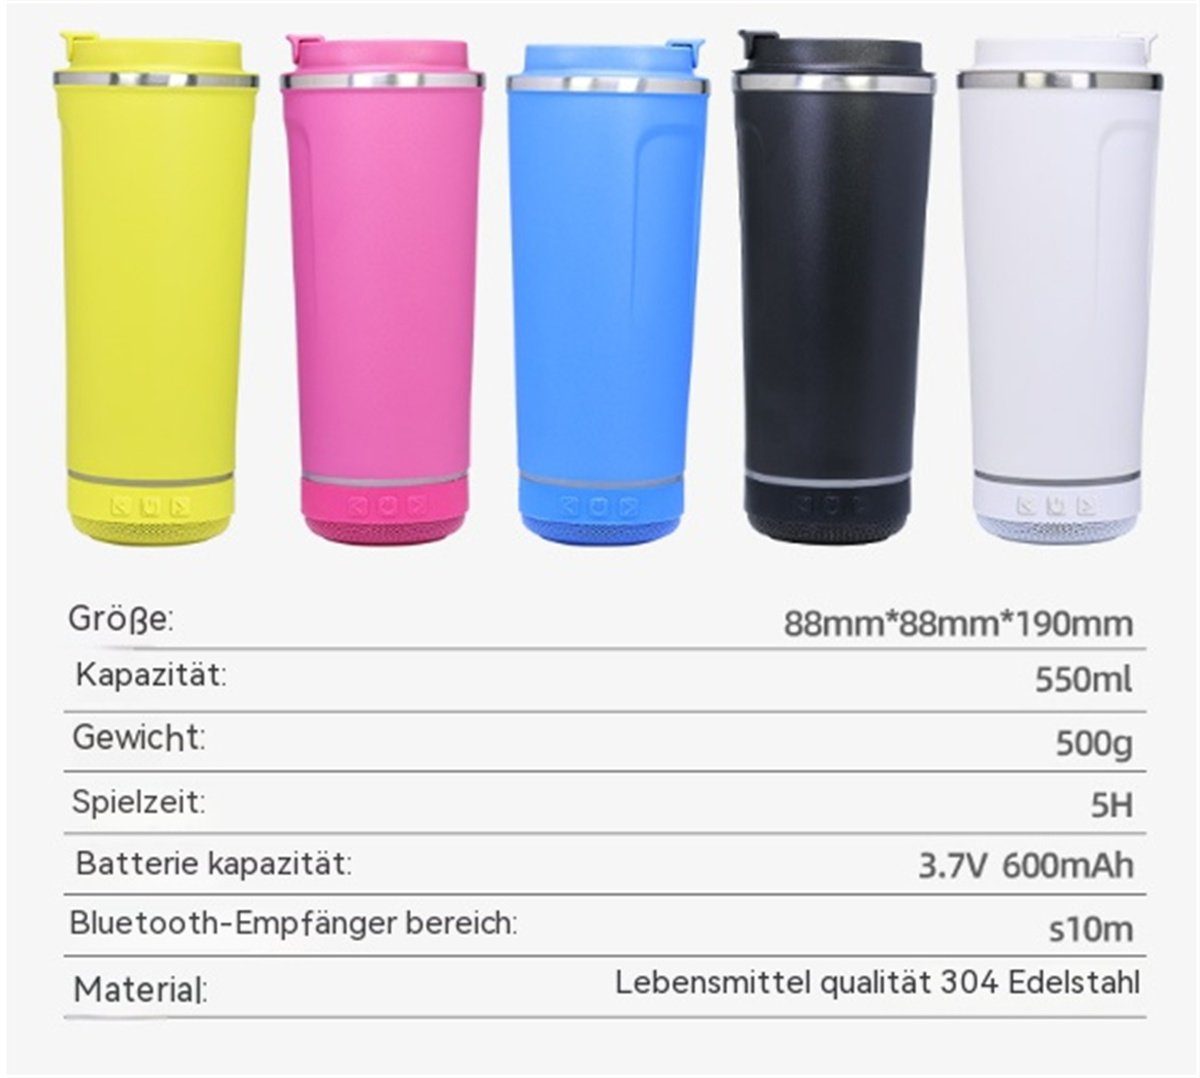 Tragbare selected carefully Bluetooth-Lautsprecher Blau Wasserbecher-Bluetooth-Lautsprecher-All-in-One-Maschine